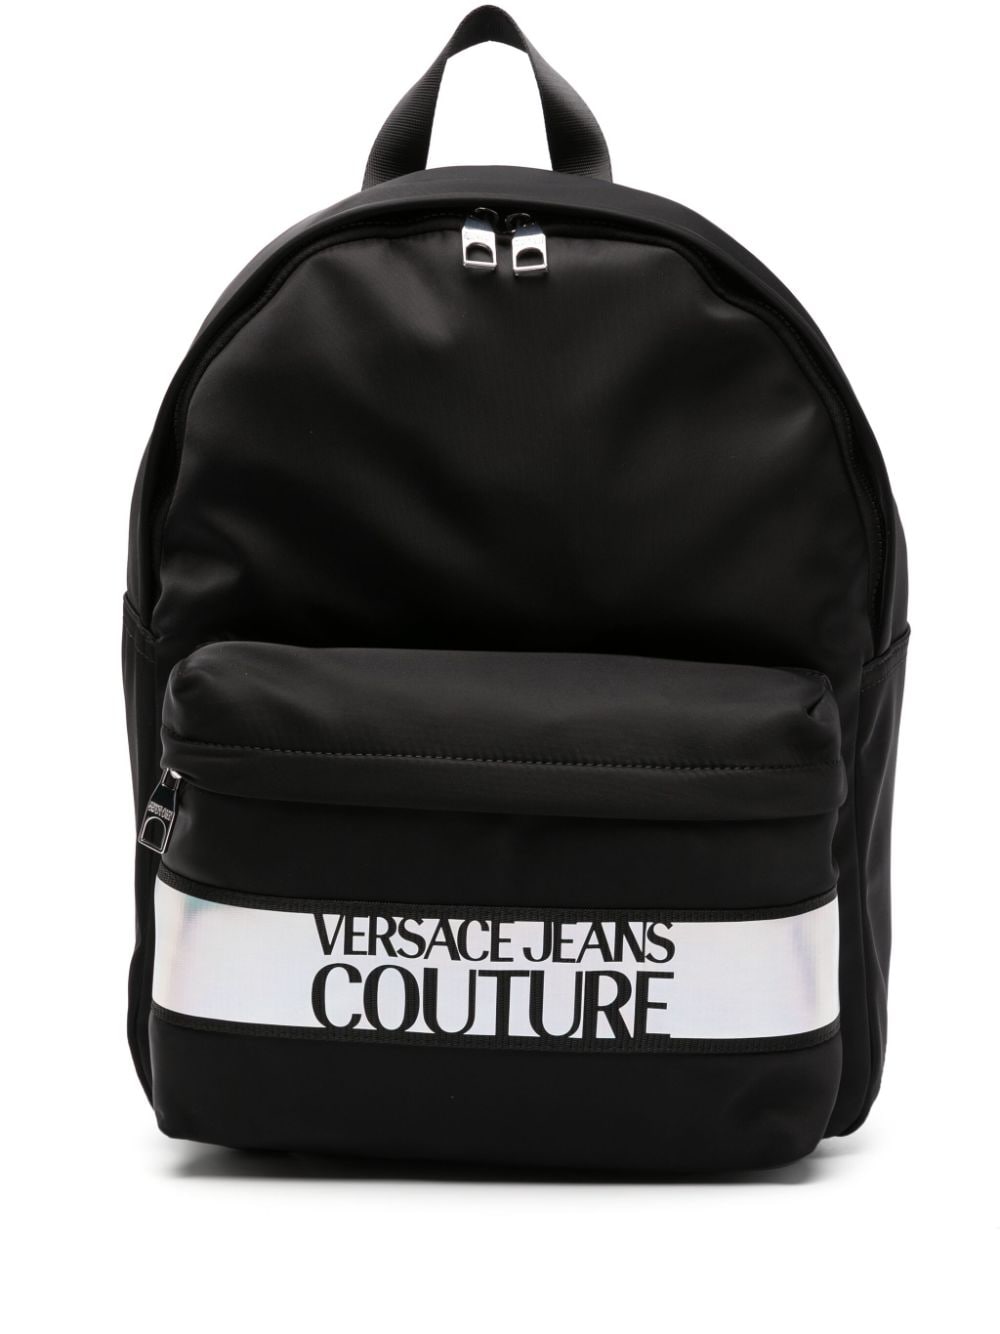 Versace Jeans Couture iridescent logo-print zip-up backpack - Black von Versace Jeans Couture